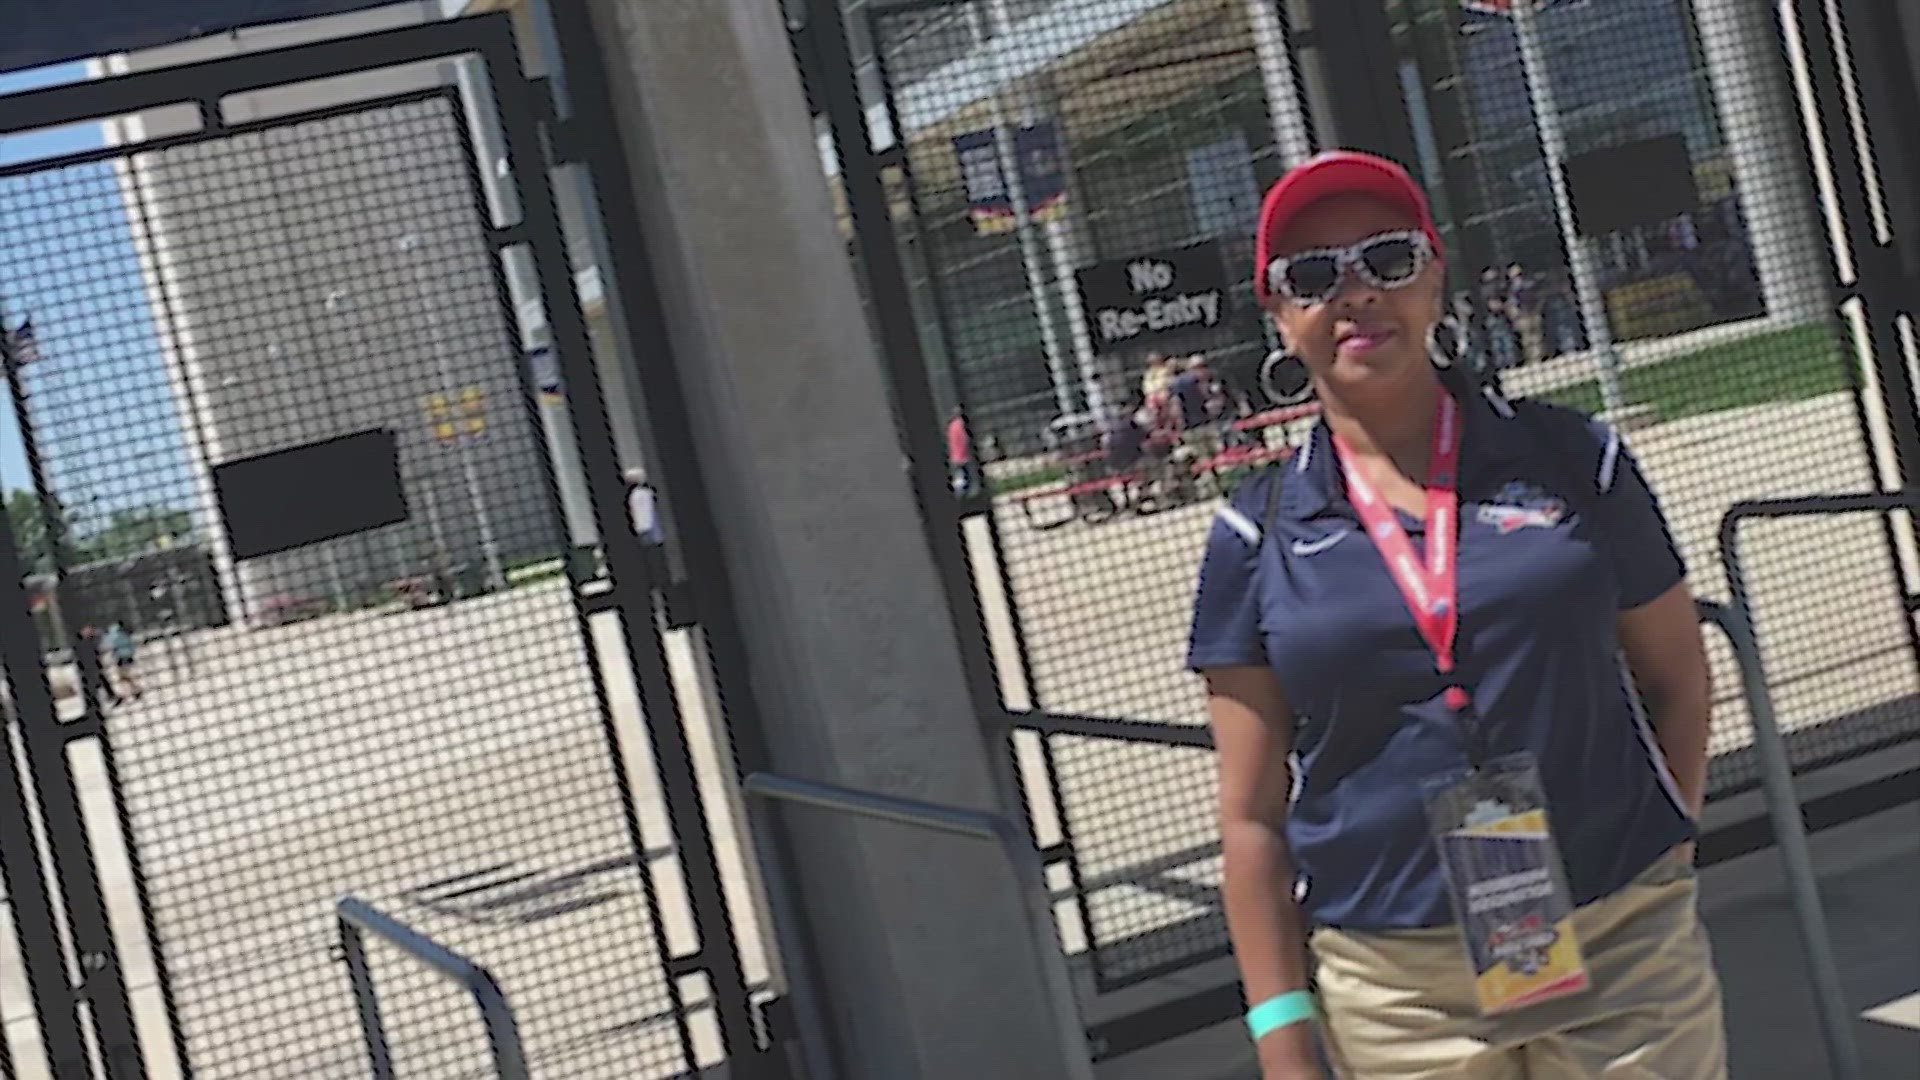 Veriel Henry is certainly no stranger to helping out when a big event rolls into town with a Final Four and a Super Bowl already on her volunteering resume.